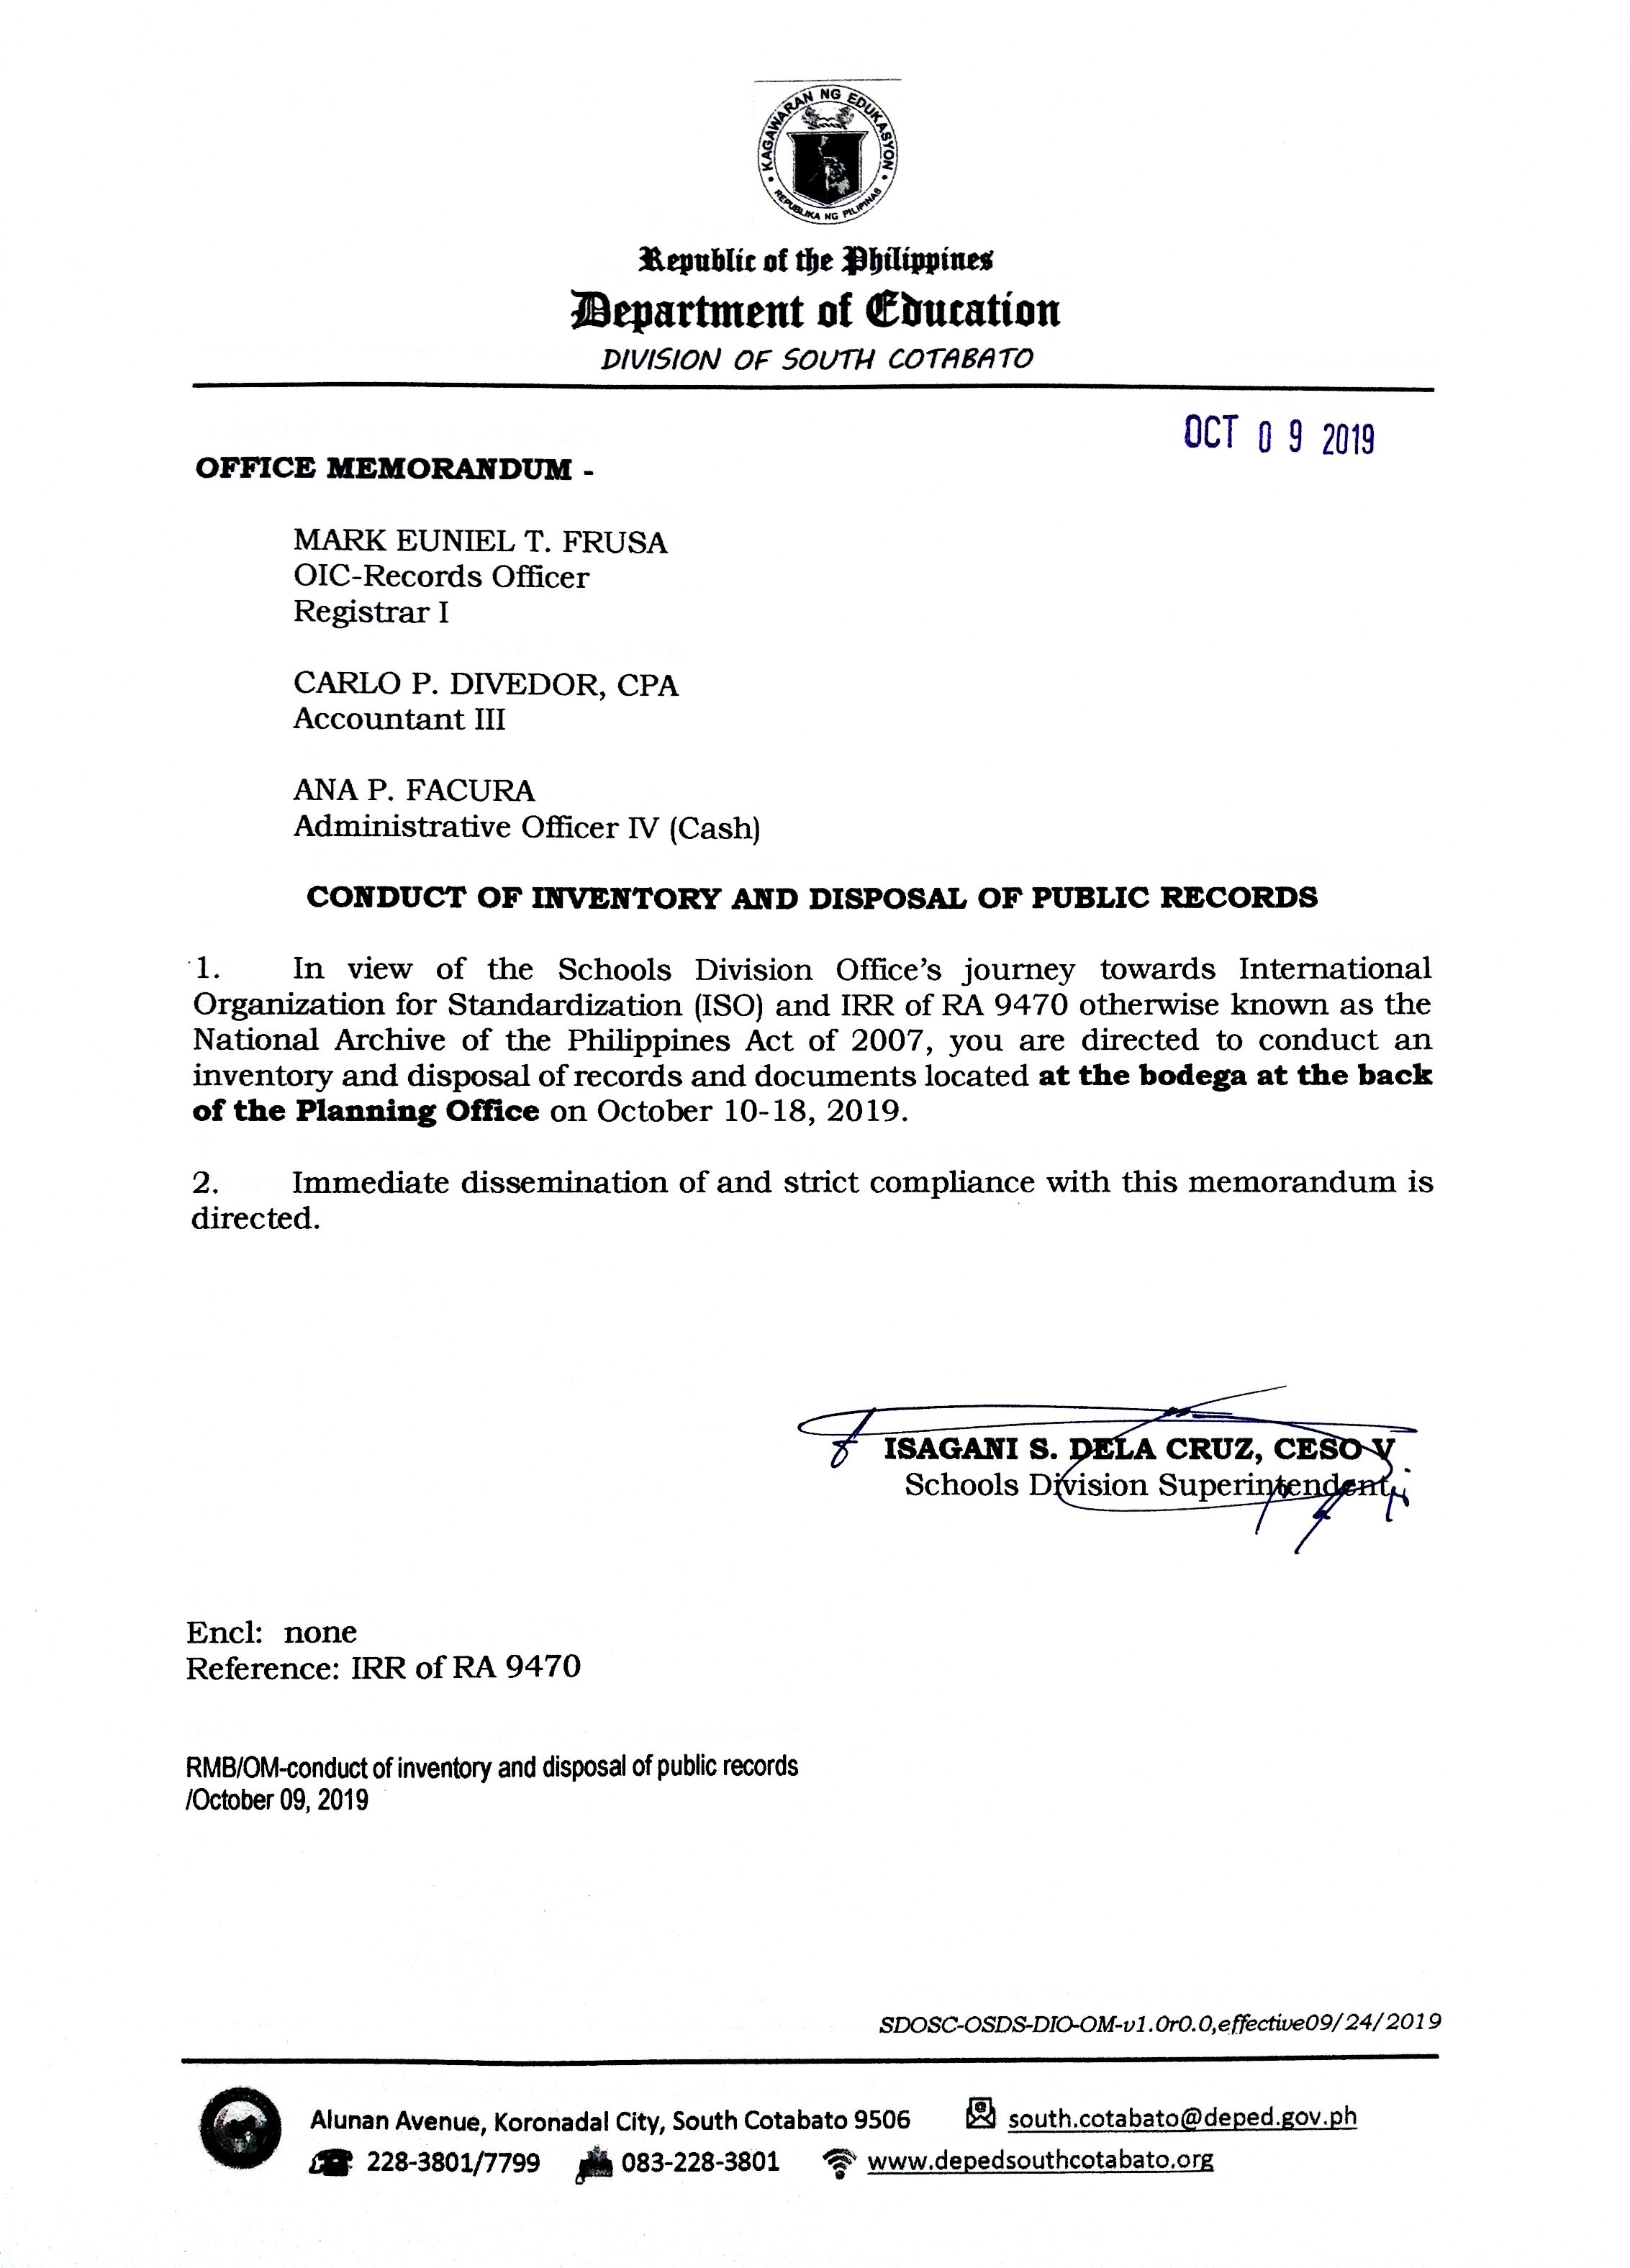 office-memorandum-conduct-of-inventory-and-disposal-of-public-records